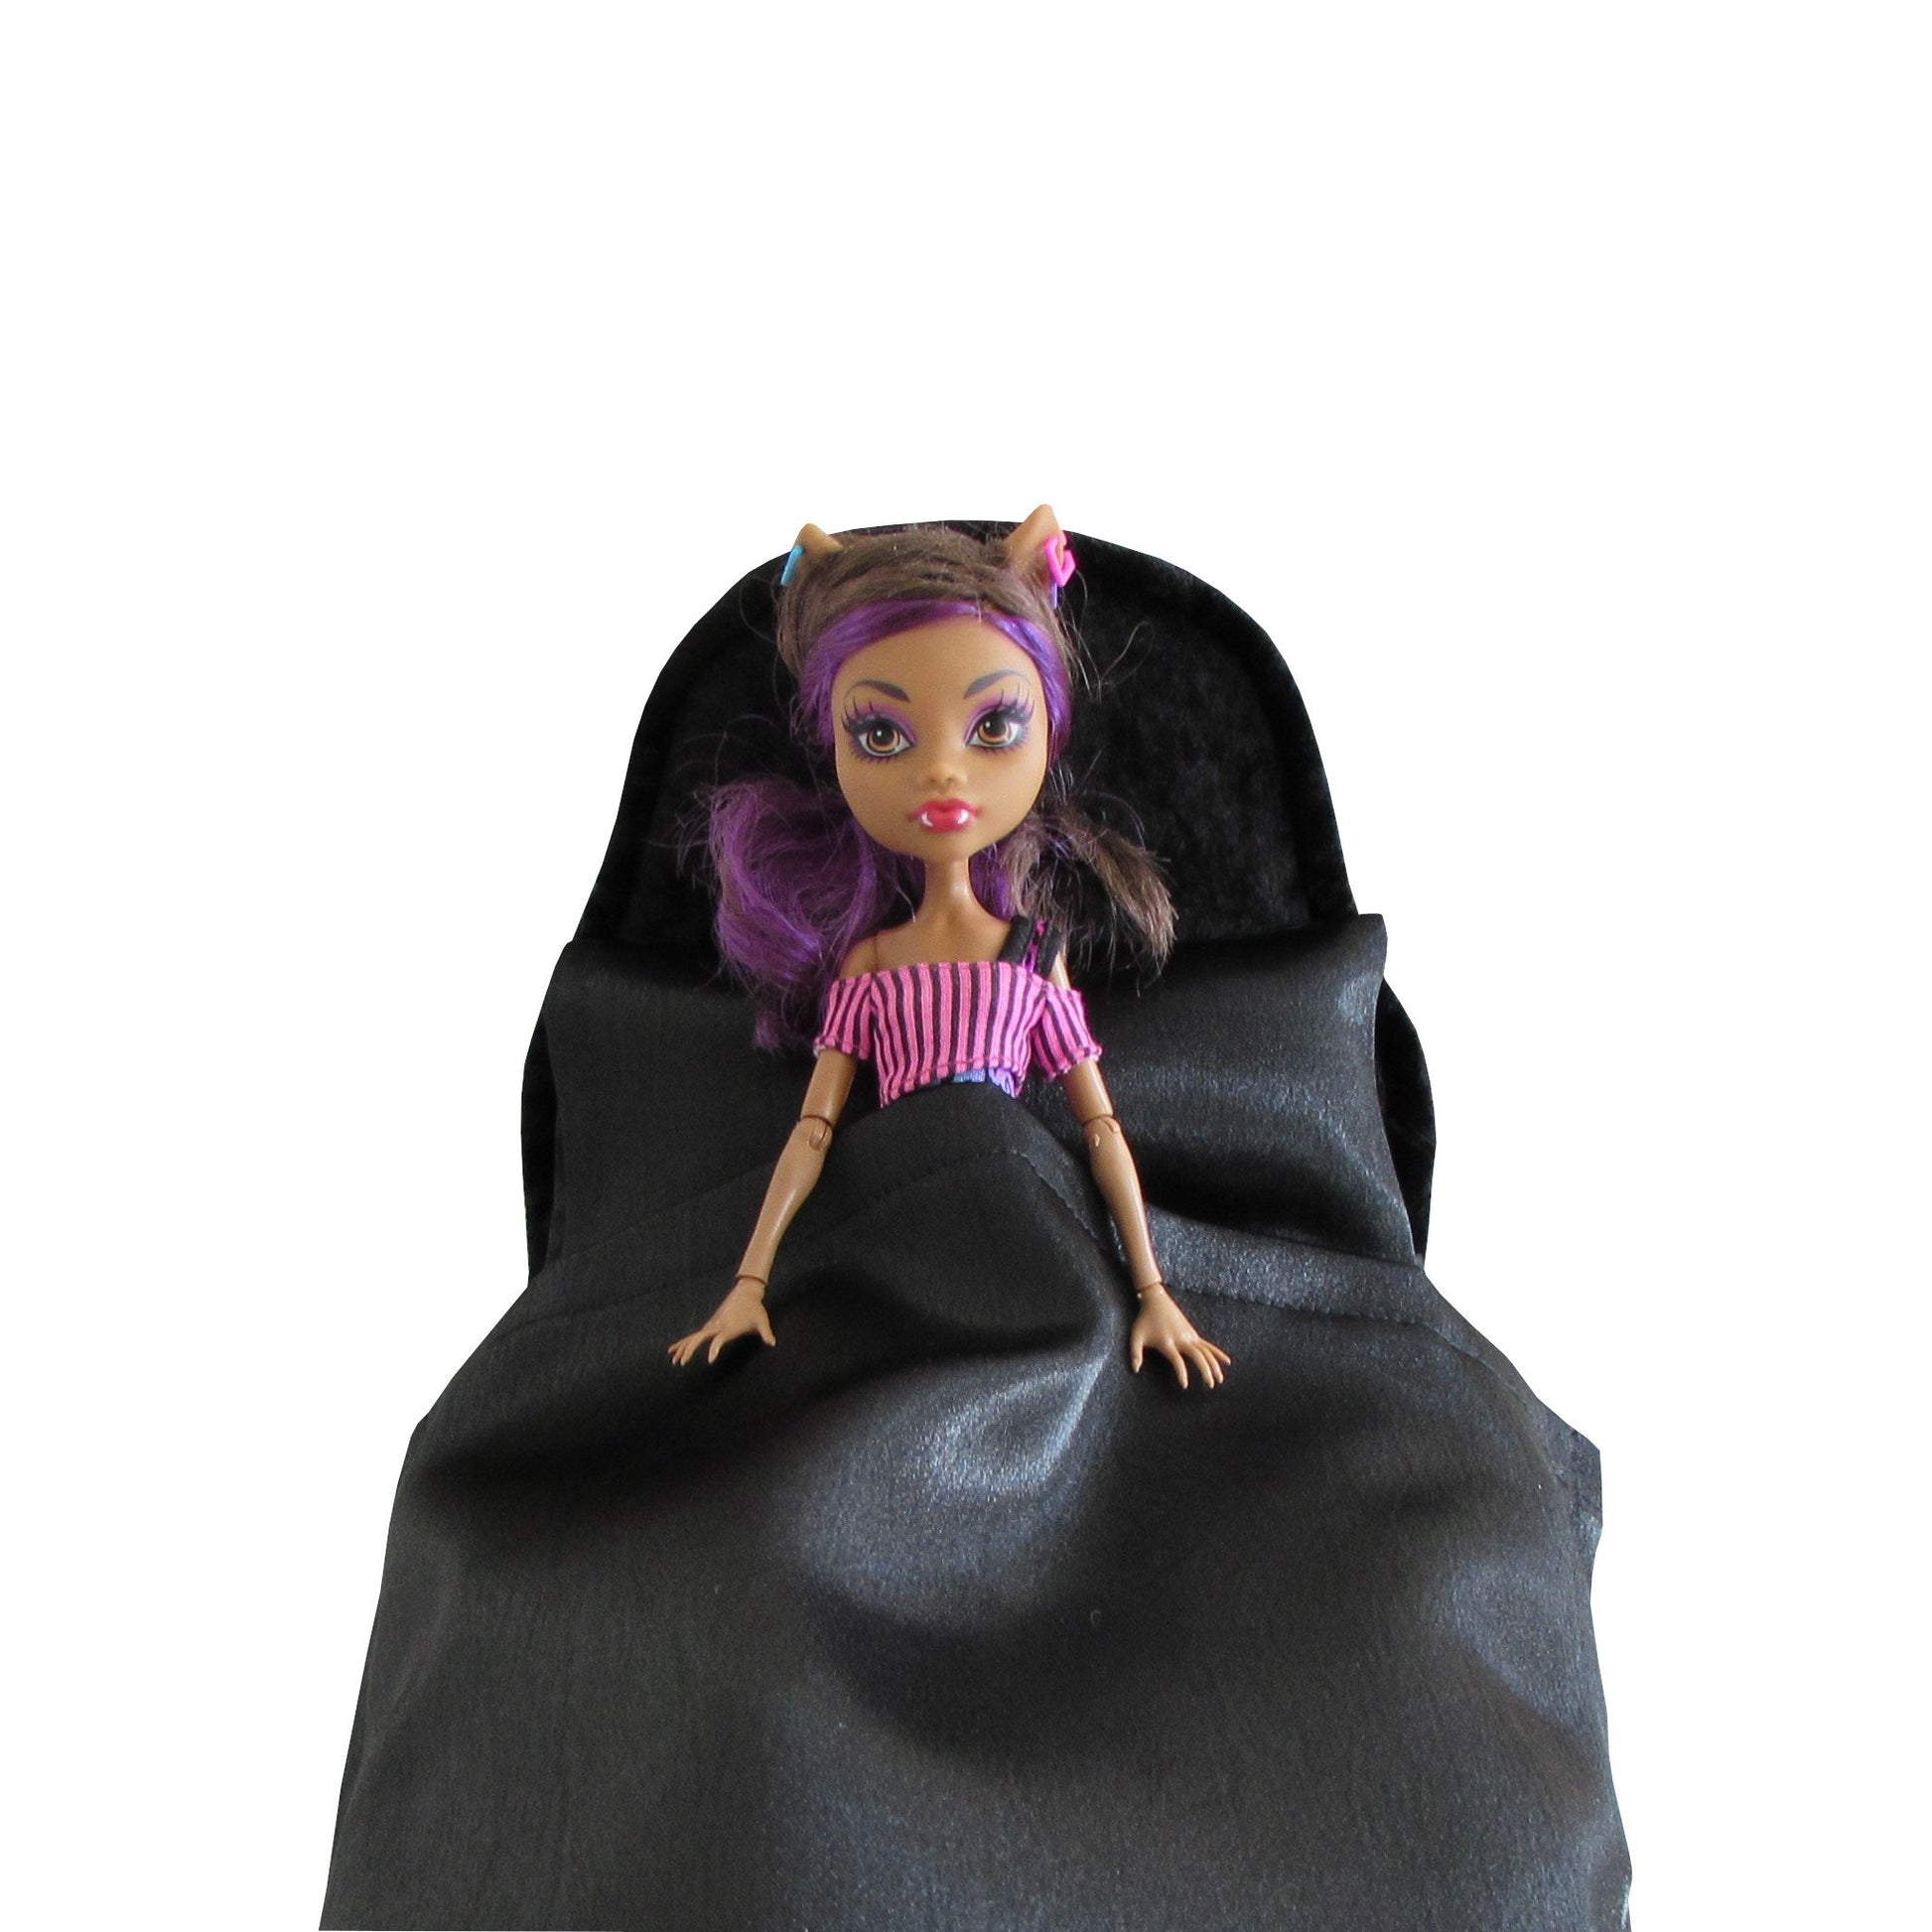 Black Satin Doll Fitted Sheet, Pillow, and Black Crushed Velvet Doll Bed for 11.5-inch and 12-inch dolls with Monster High doll